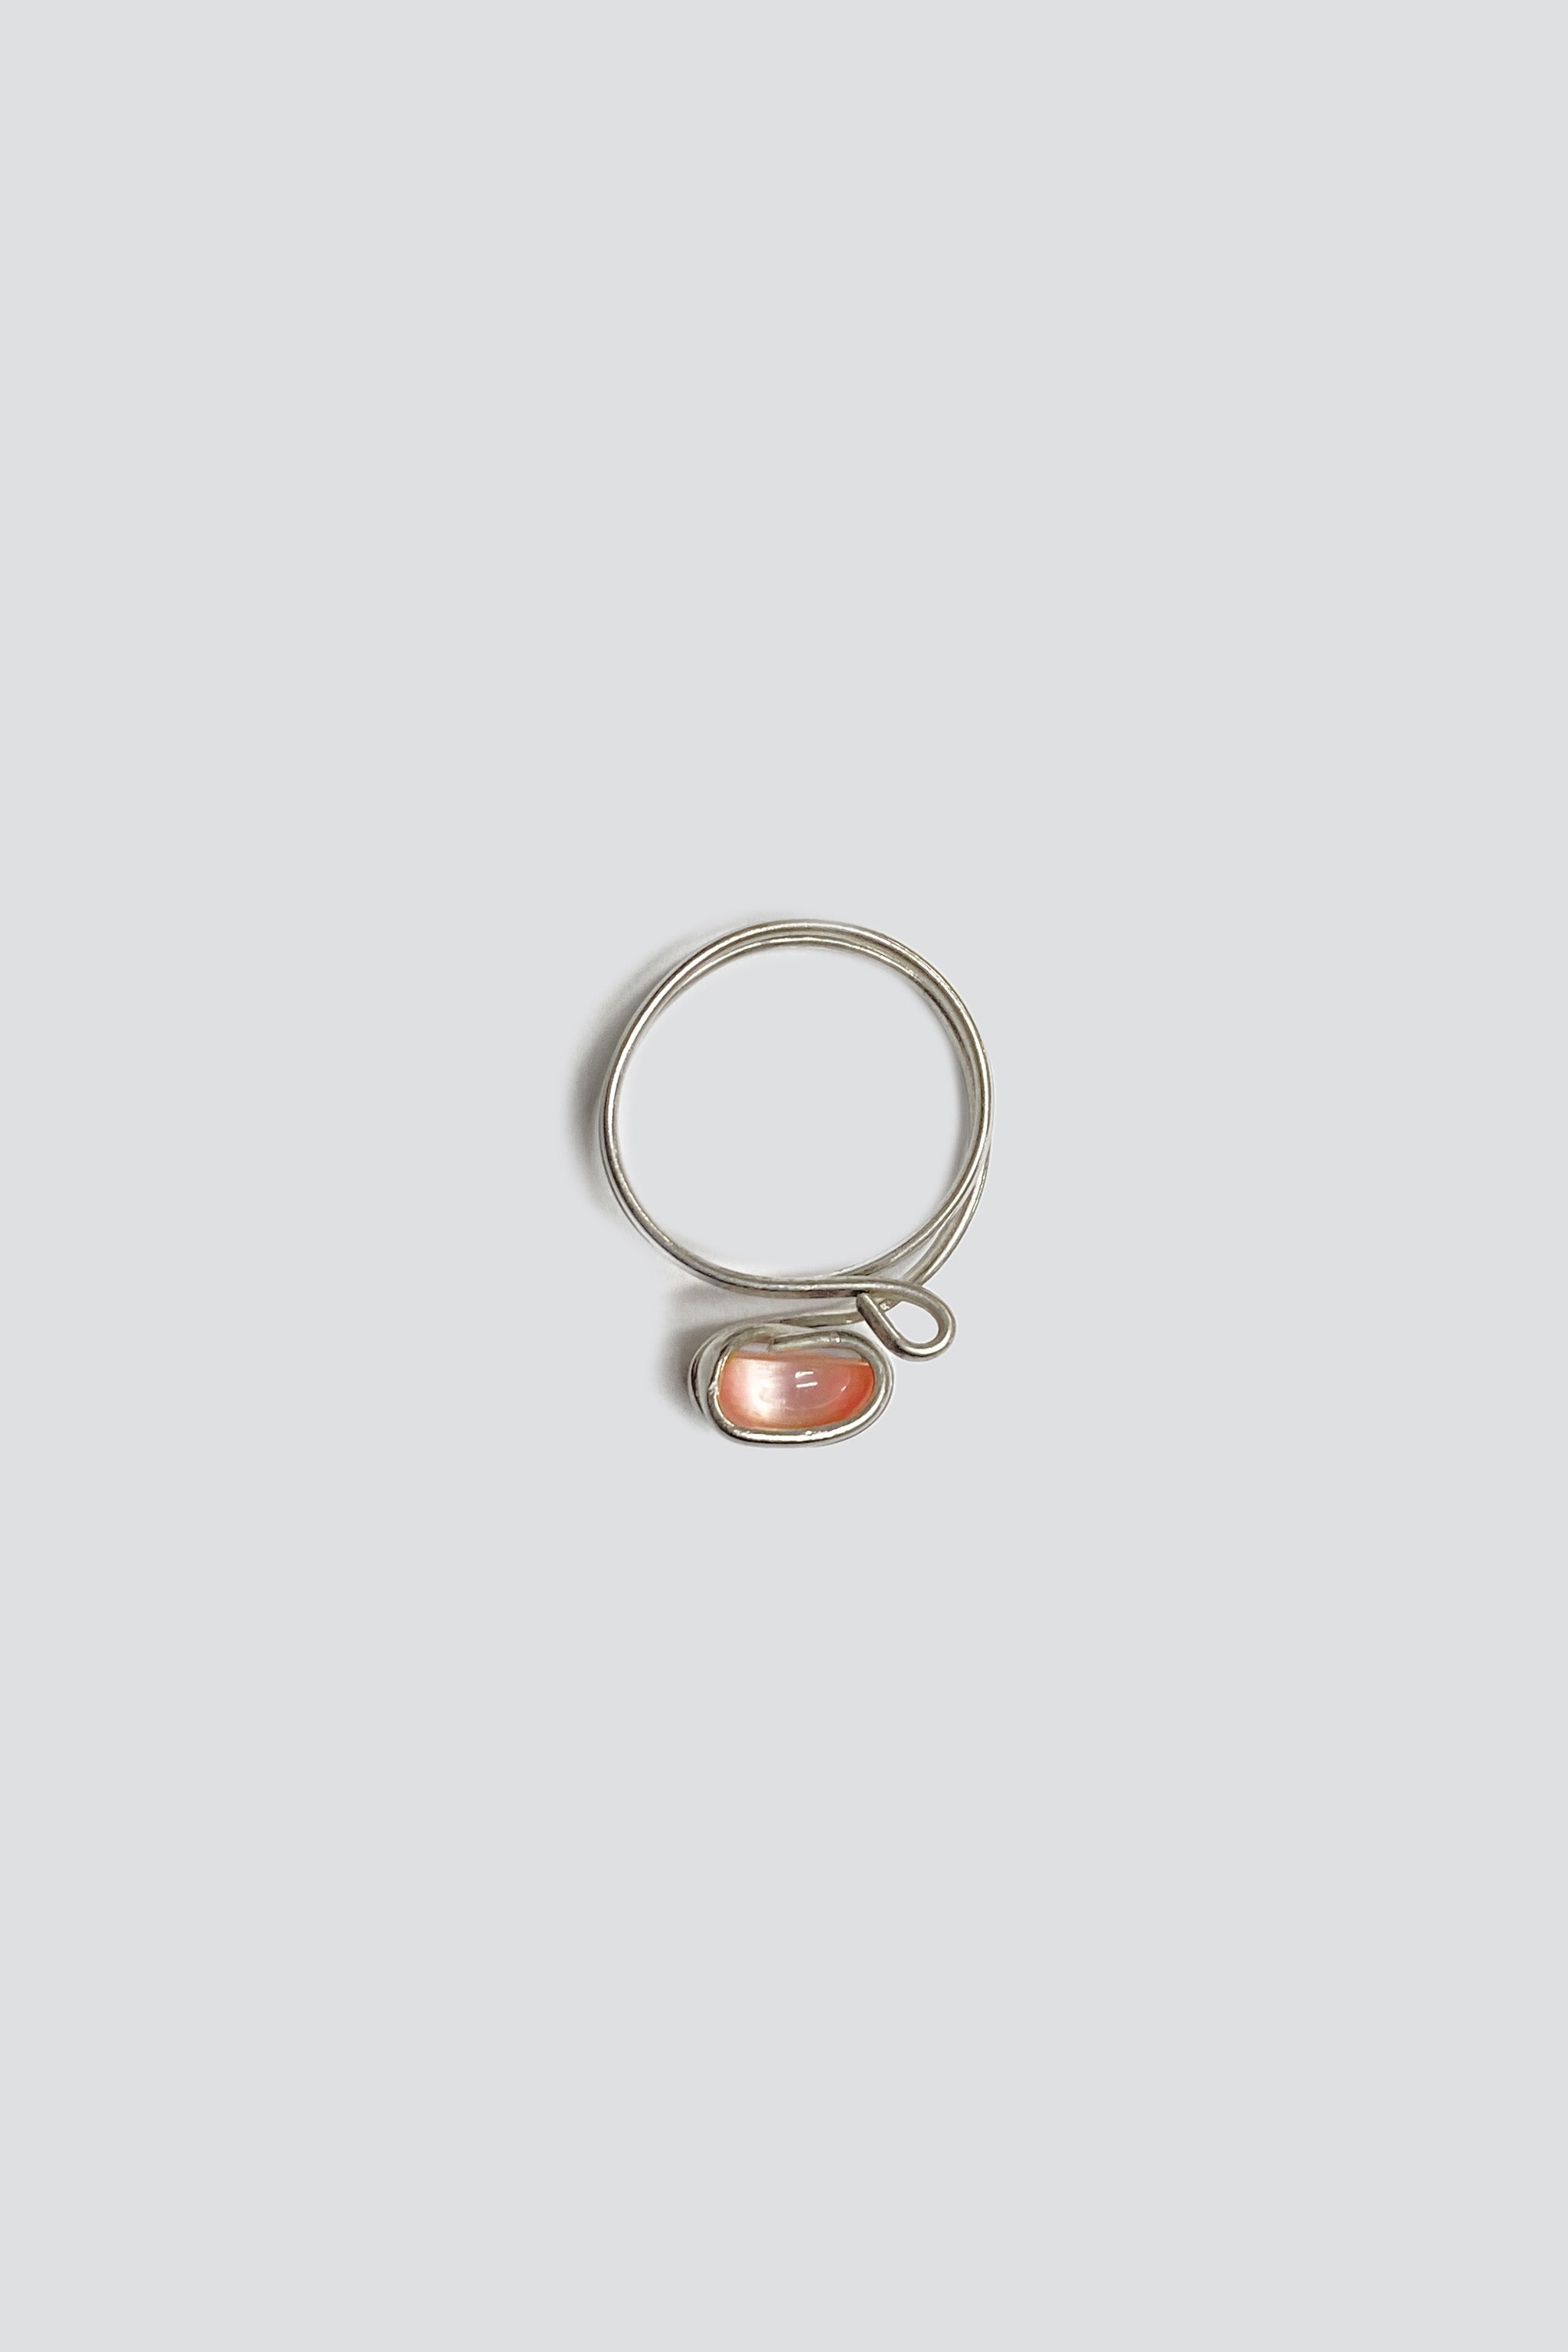 Sterling Silver Suspended Pink Cat Eye Ring